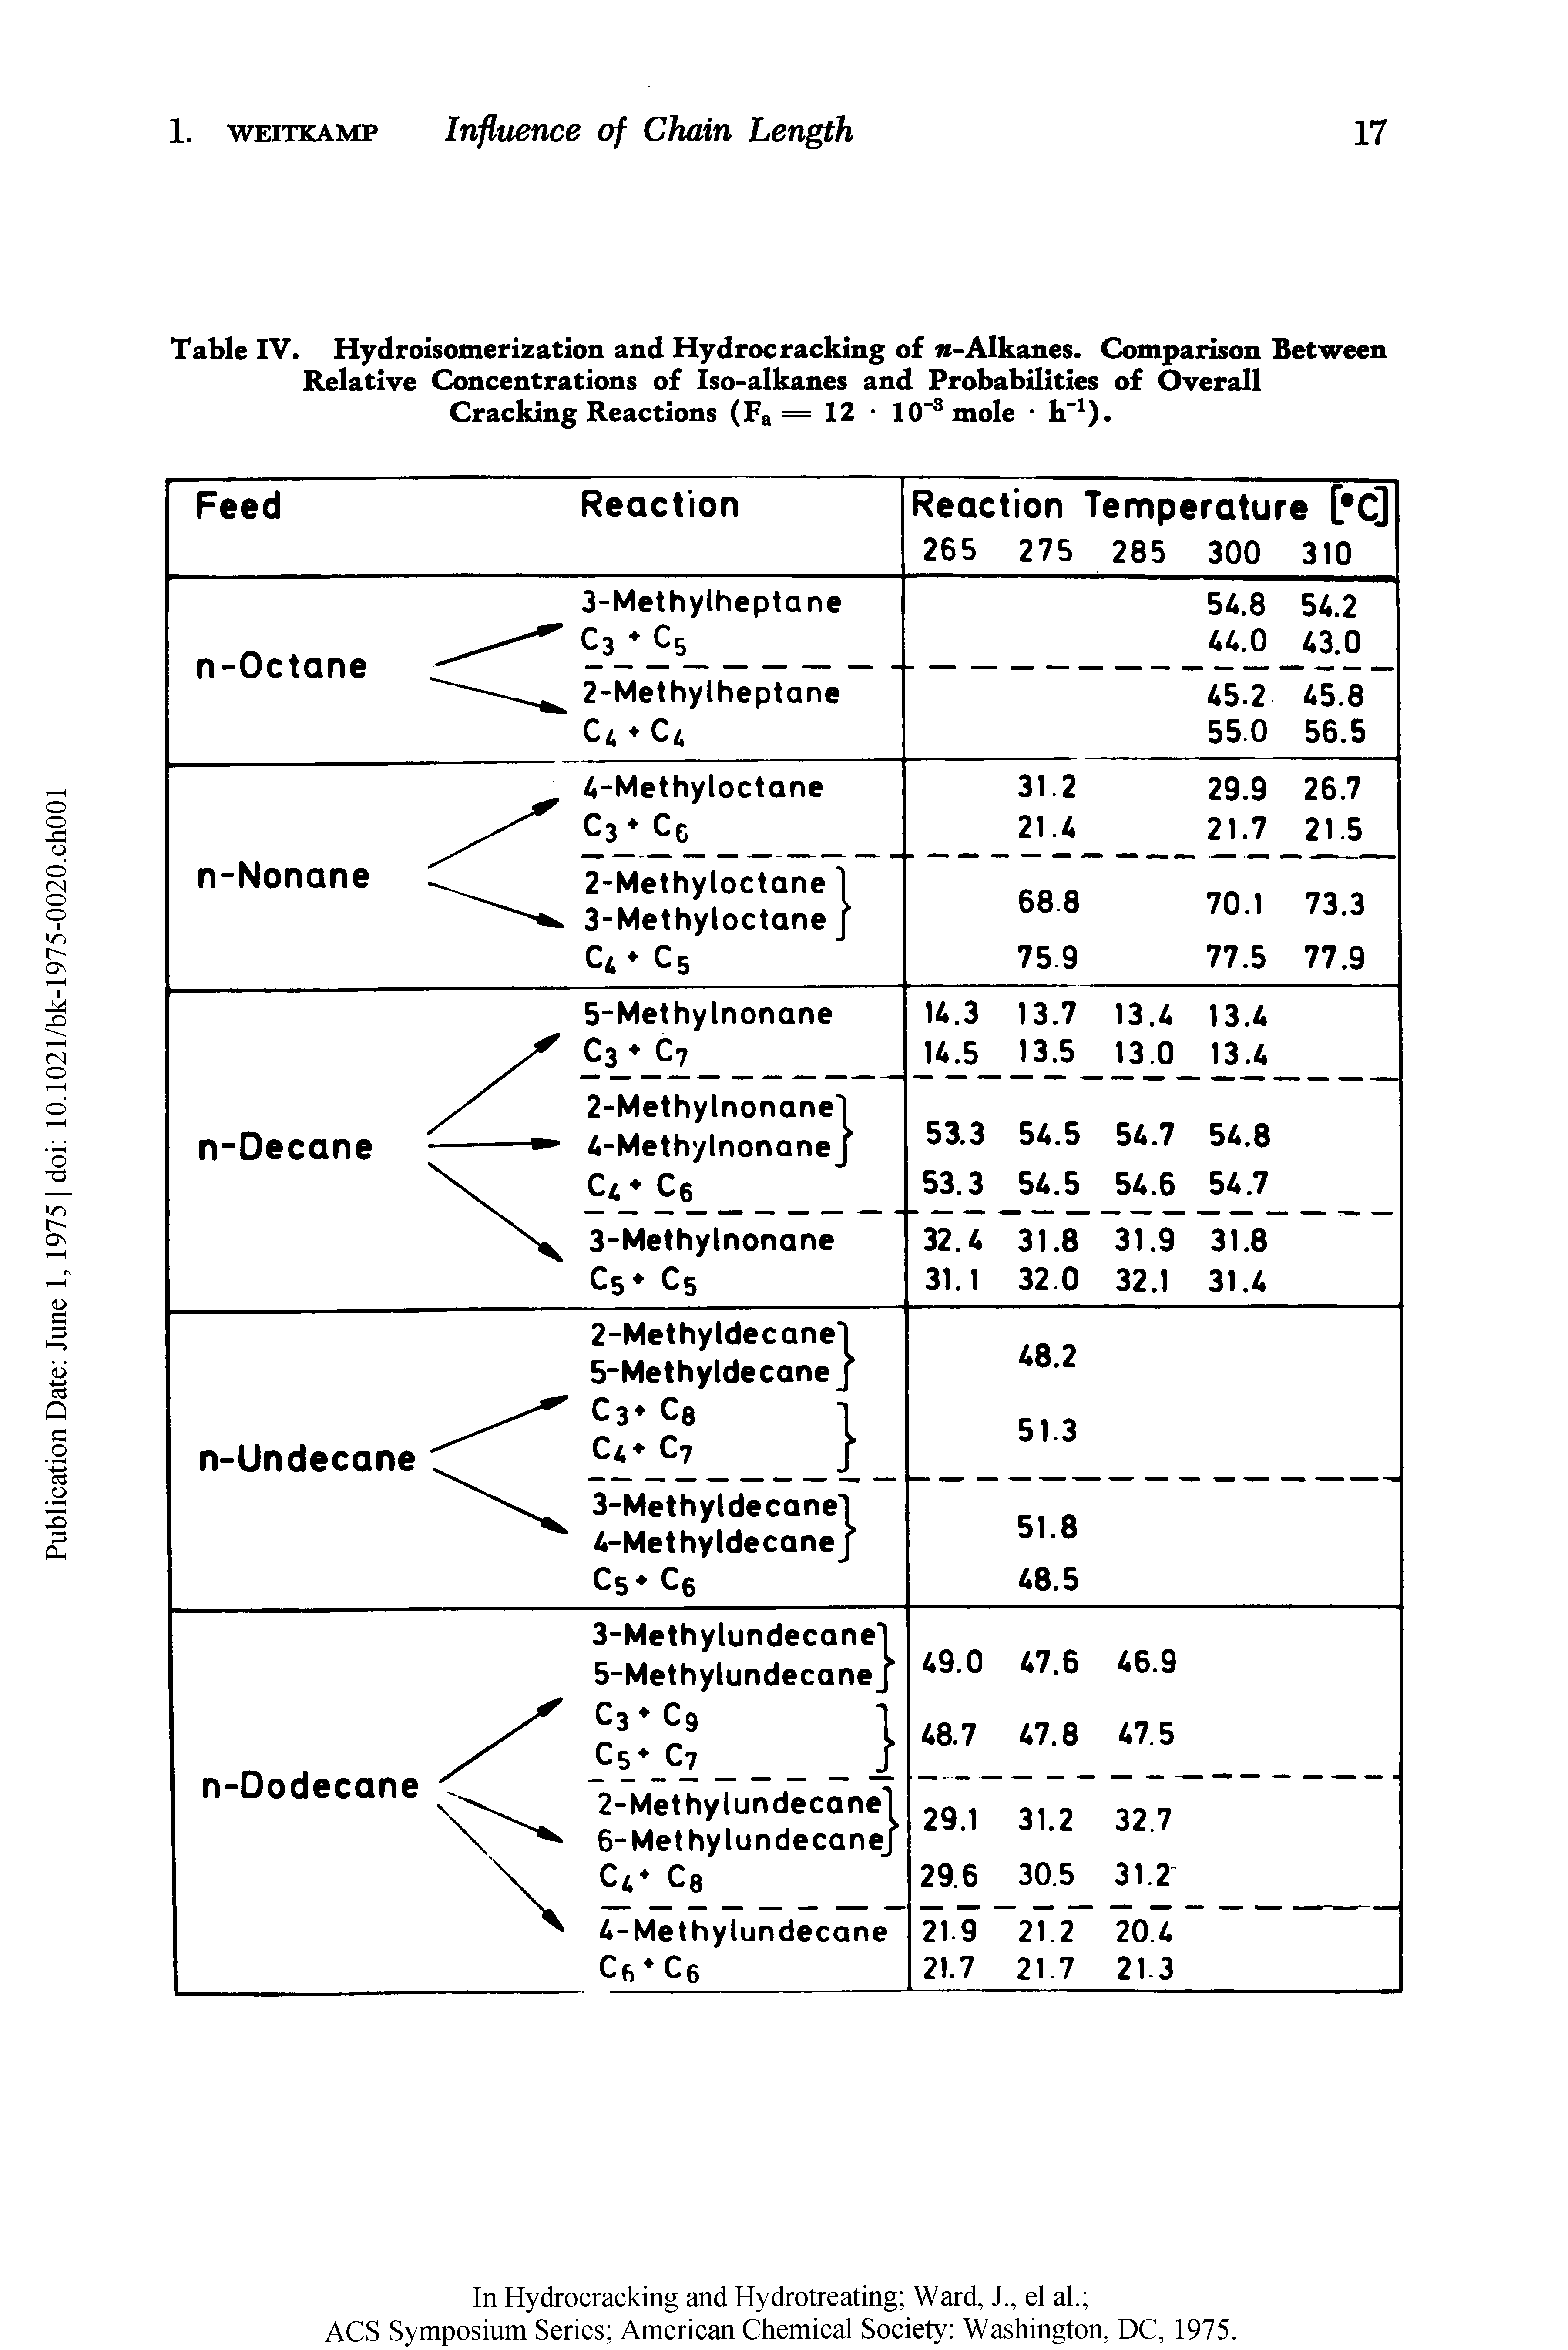 Table IV. Hydroisomerization and Hydrocracking of -Alkanes. Comparison Between Relative Concentrations of Iso-alkanes and Probabilities of Overall Cracking Reactions (Fa = 12 10 3mole h 1).